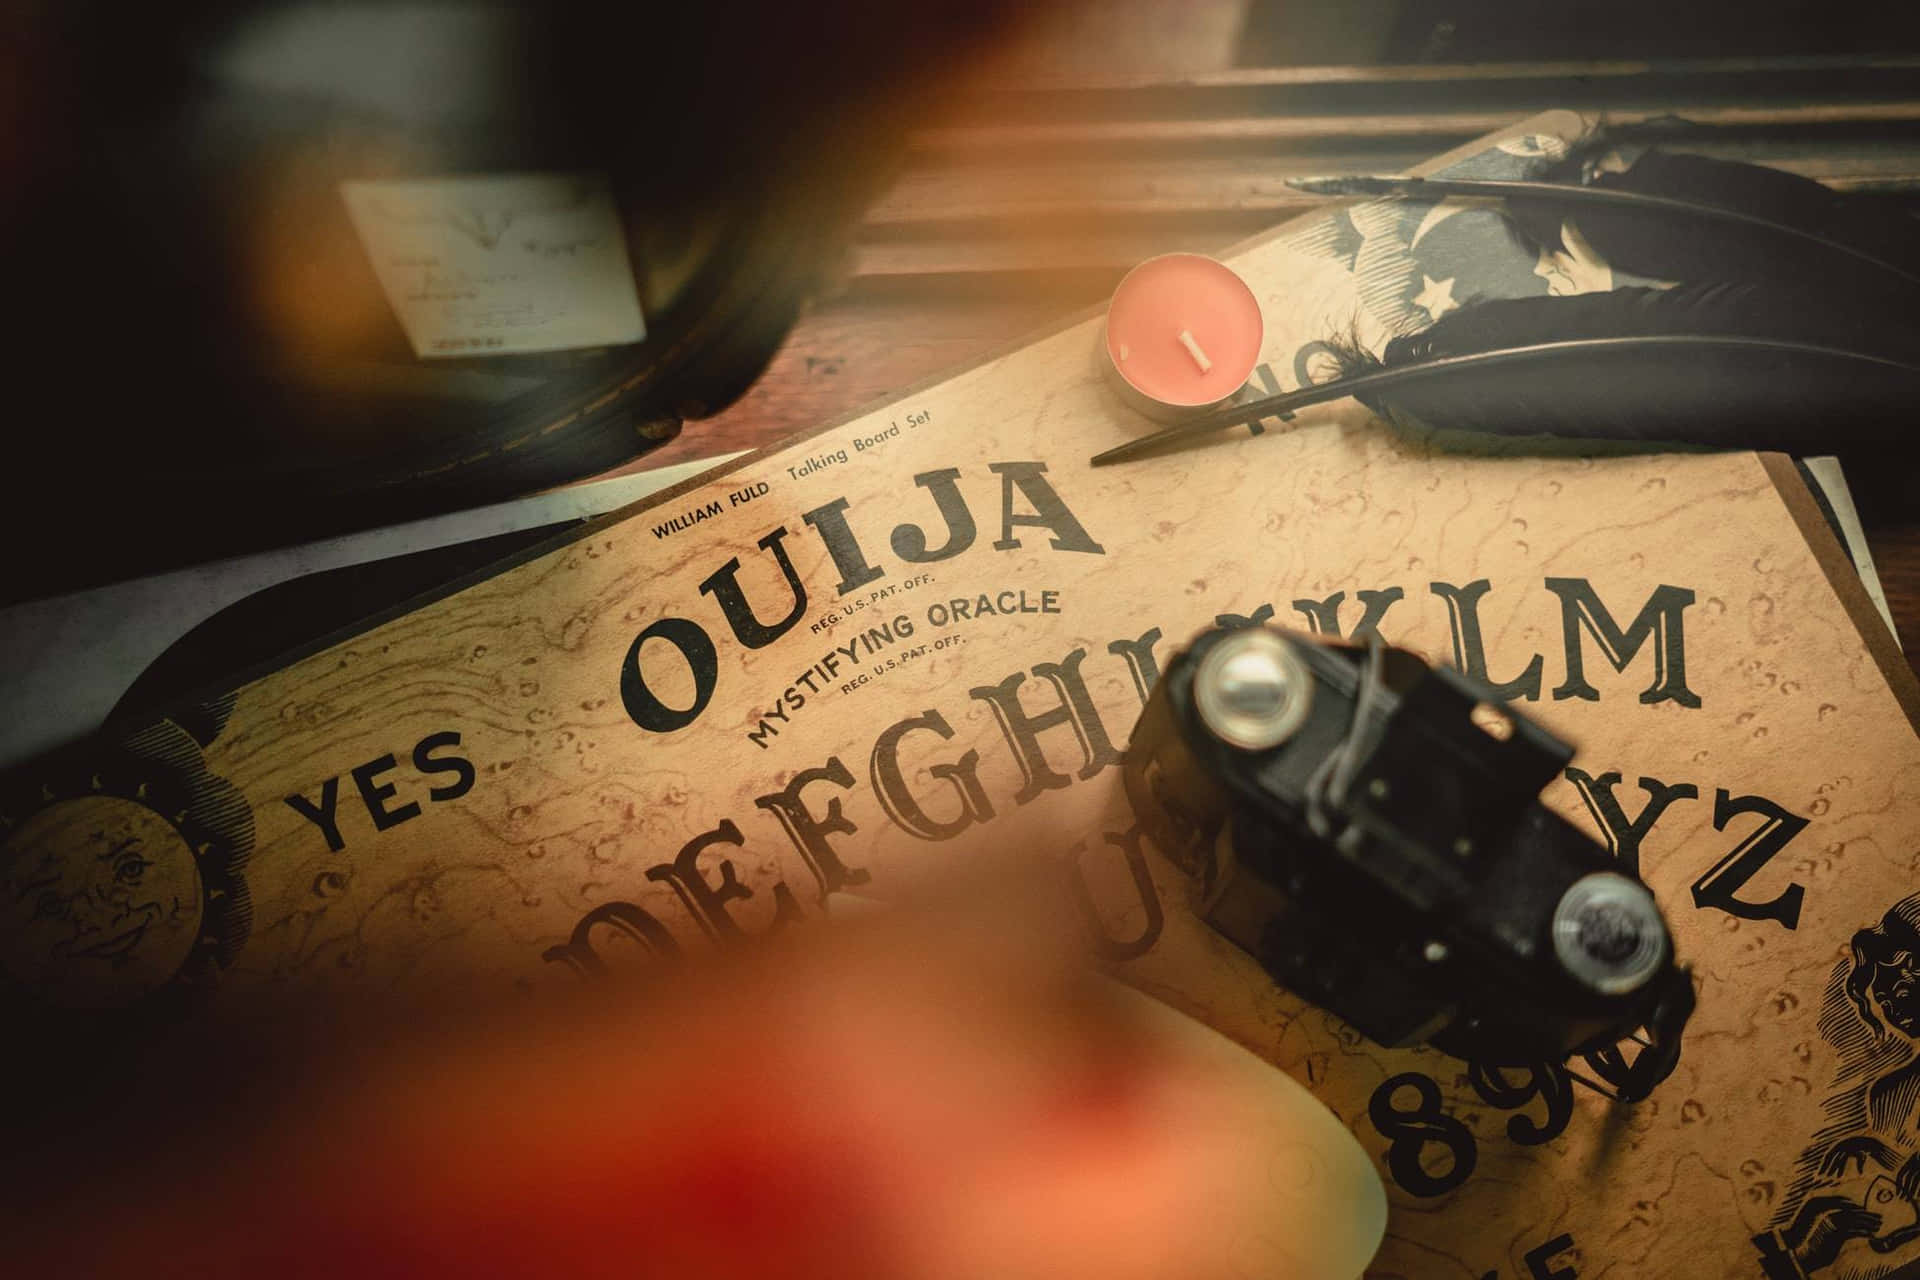 Take a look in the dark with the mysterious Ouija board